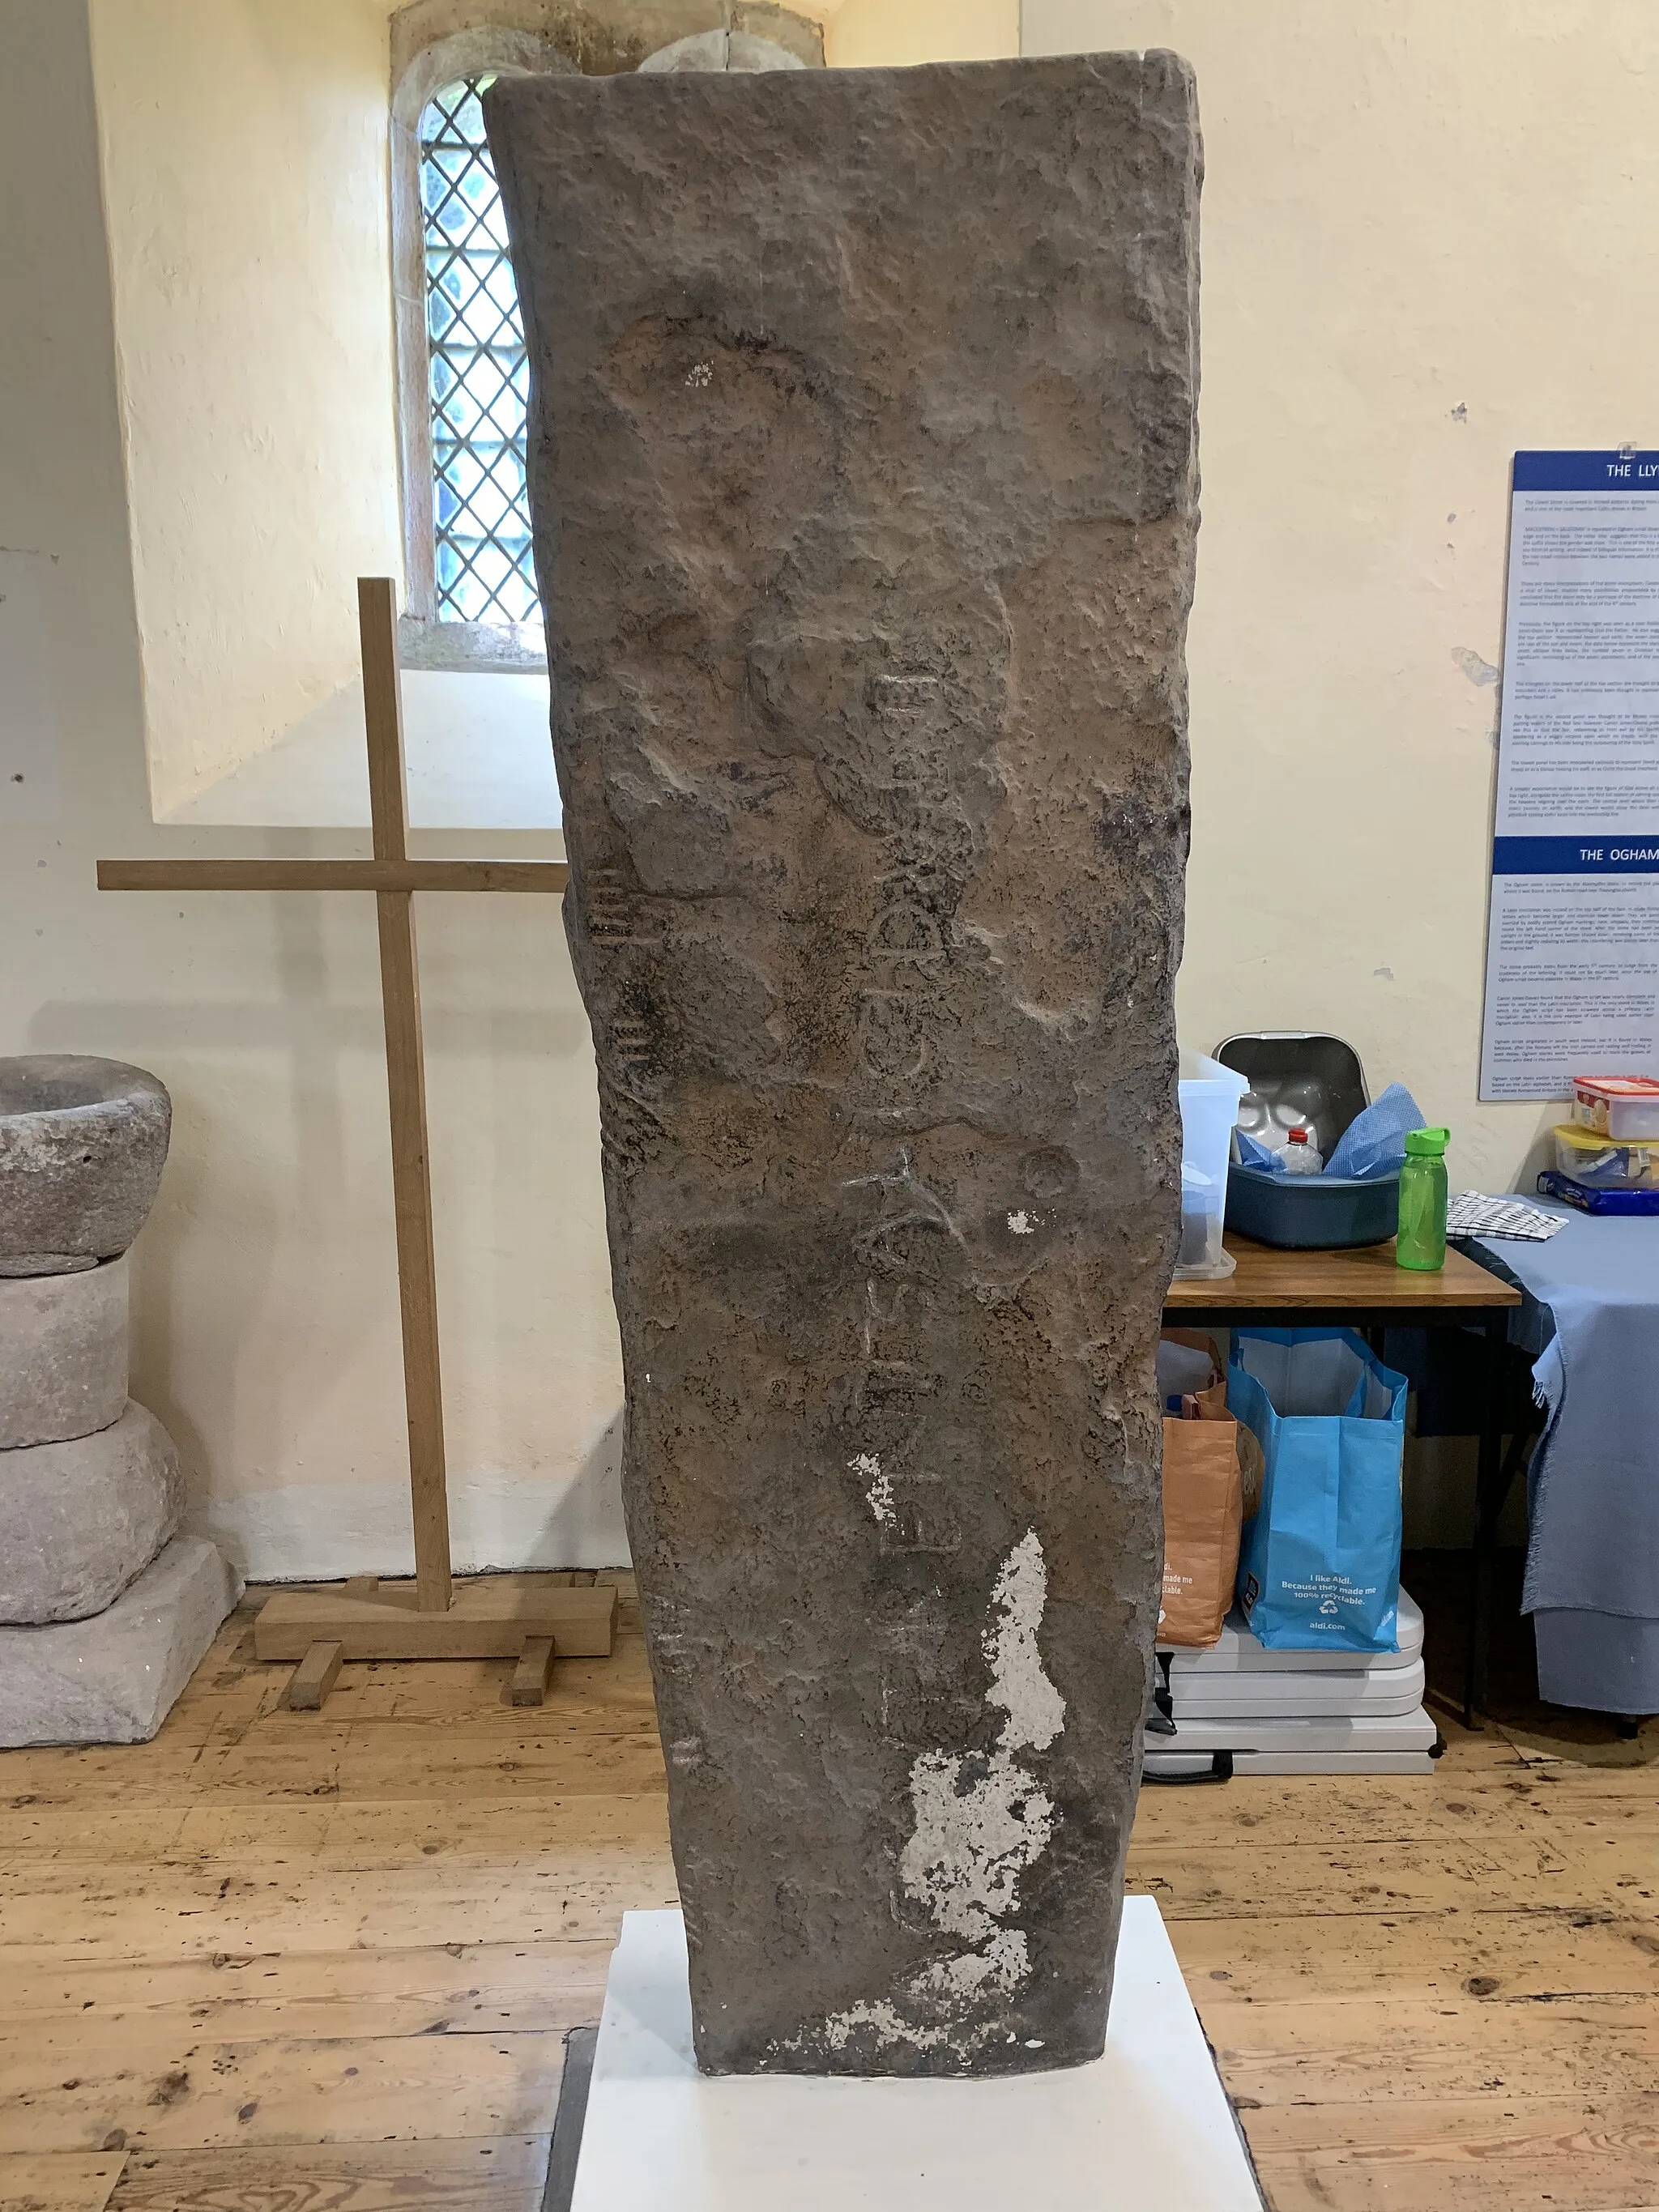 Photo showing: Replica of the Llywel Stone, stored in St David's Church, Llywel. Another copy is held in the Brecon Museum and the original is held in the British Museum, London.